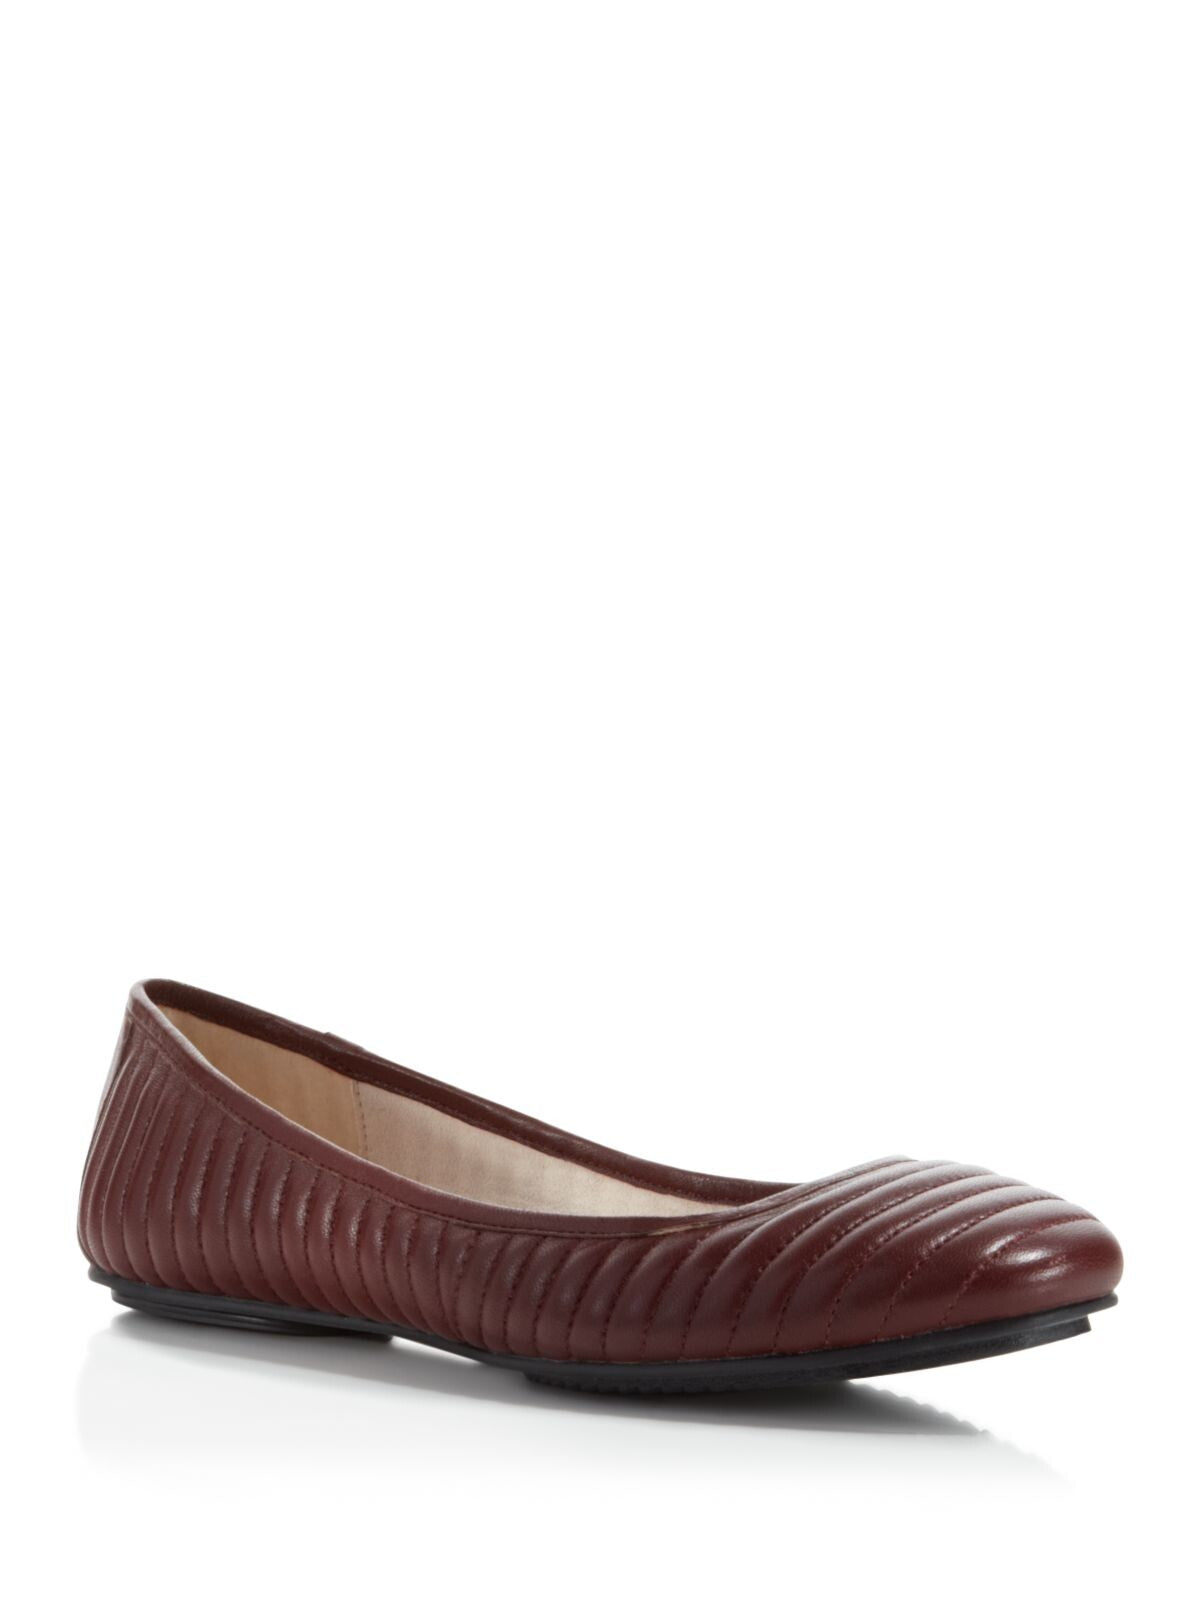 KENNETH COLE Womens Brick Burgundy Ribbed Tracy Round Toe Slip On Leather Ballet Flats 8 M